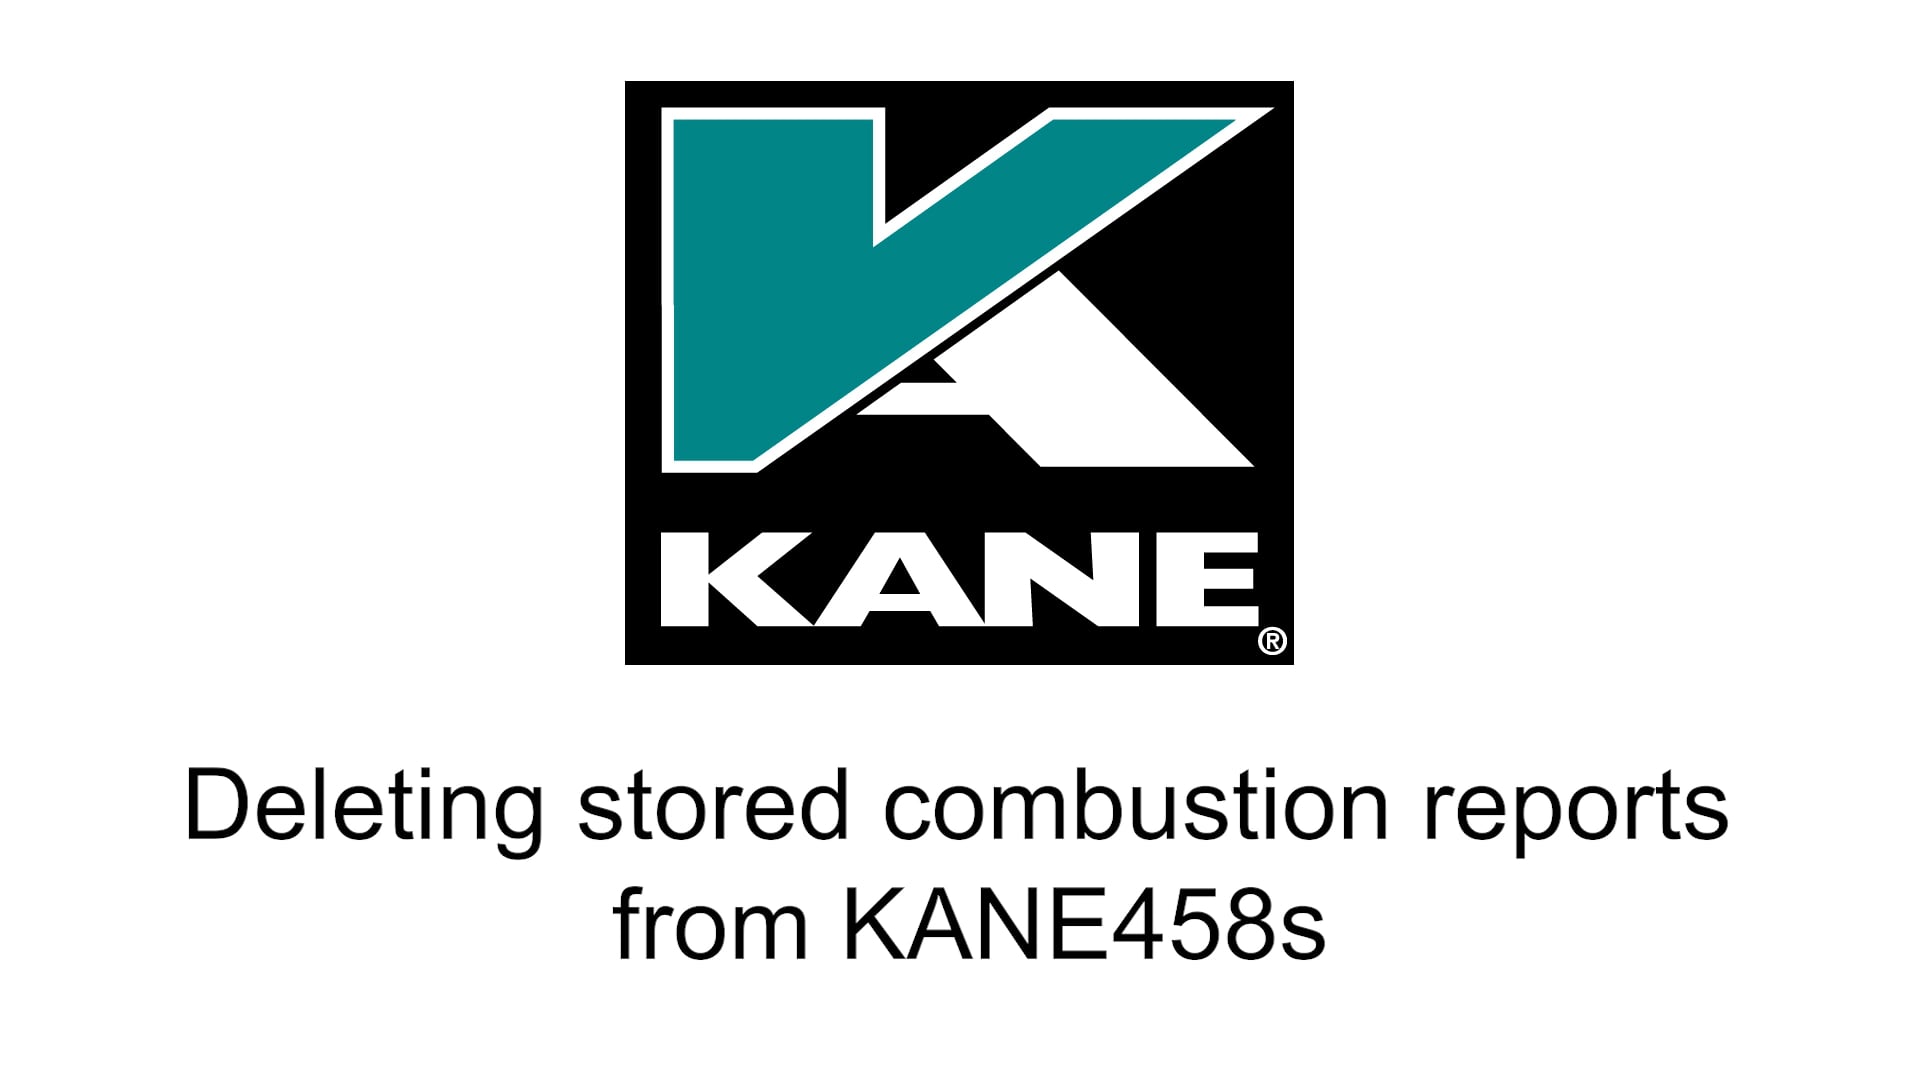 Kane Analysers Tutorial – Deleting Stored Combustion Reports KANE458s